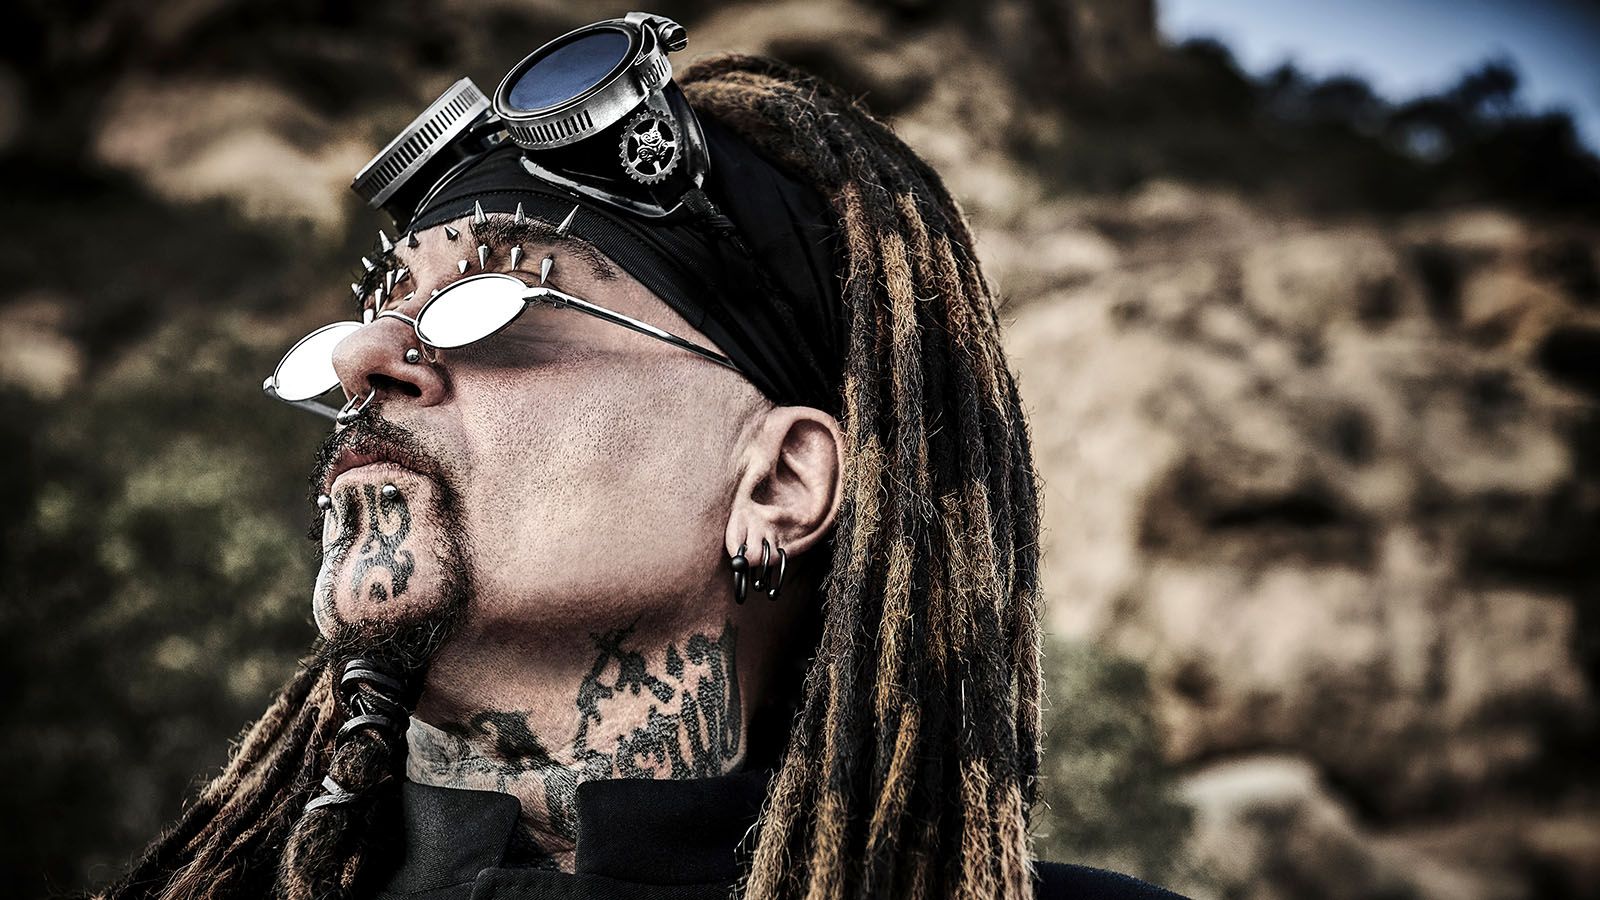 Al Jourgensen will bring Ministry to The Clyde Theatre on Saturday, May 6, with Gary Numan and Front Line Assembly.